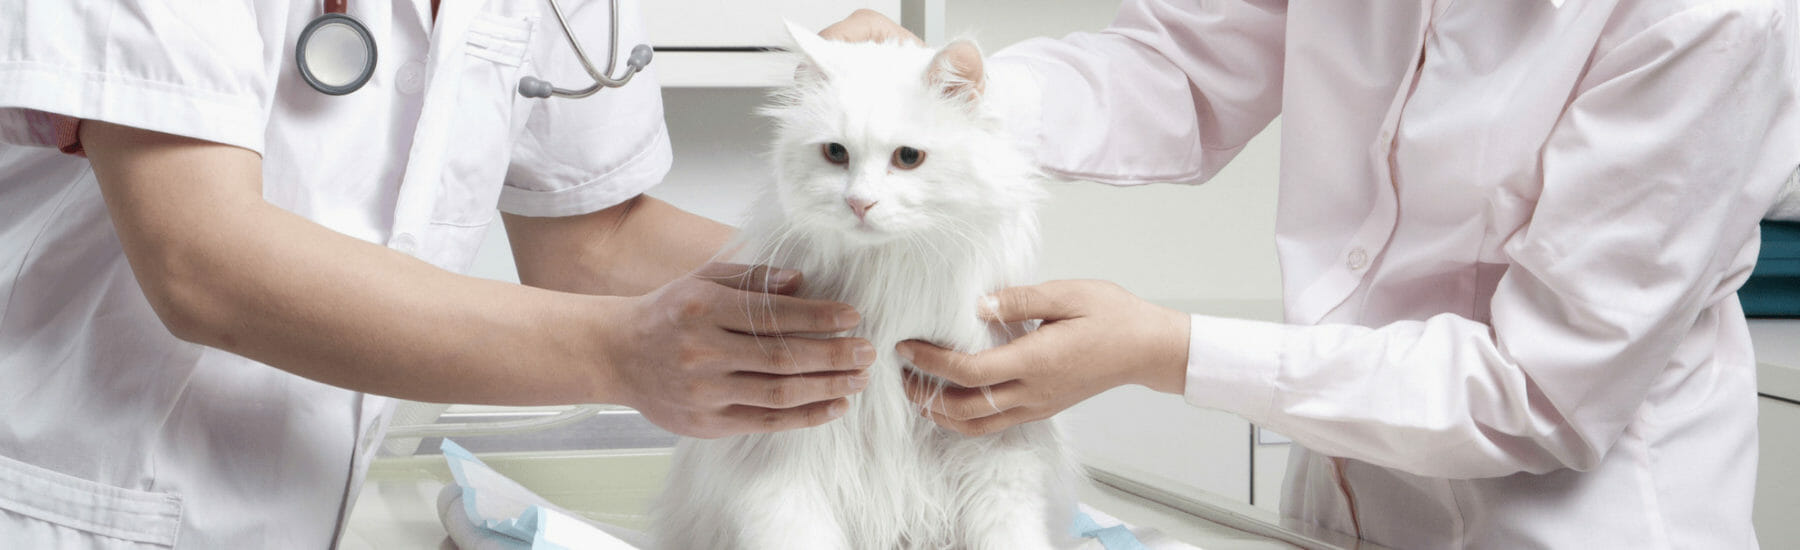 Small white cat getting a vaccination by two veterinarians